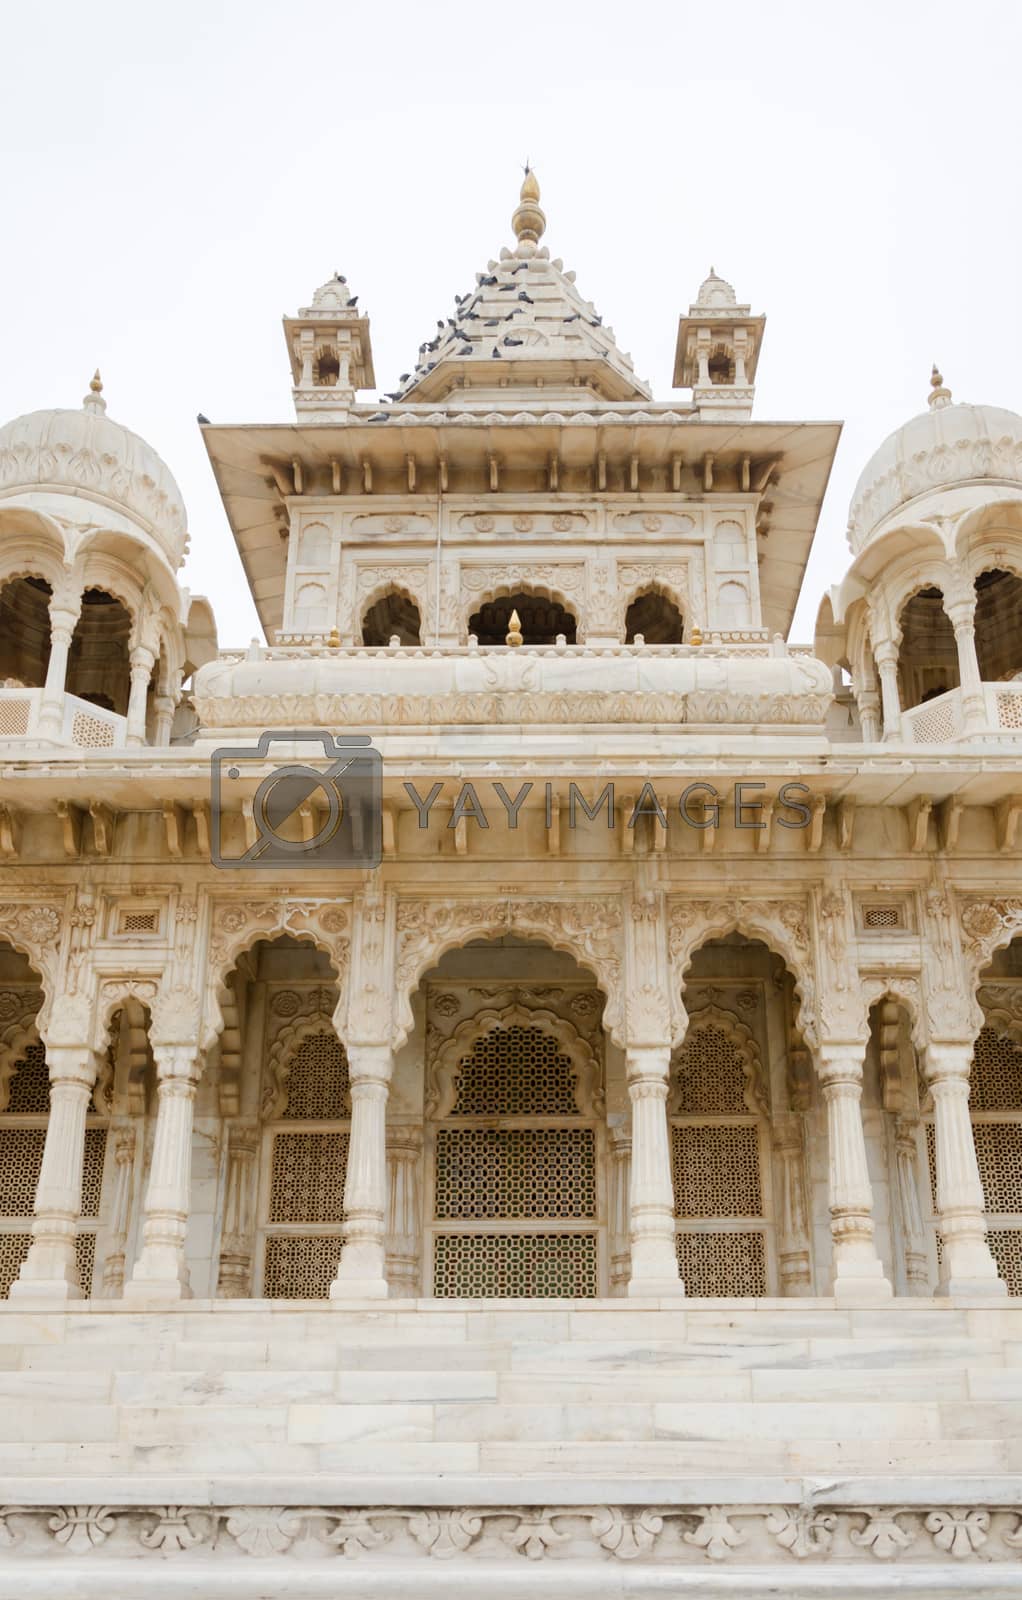 Royalty free image of Jaswant Thada. Ornately carved white marble tomb of Jodhpur by siraanamwong